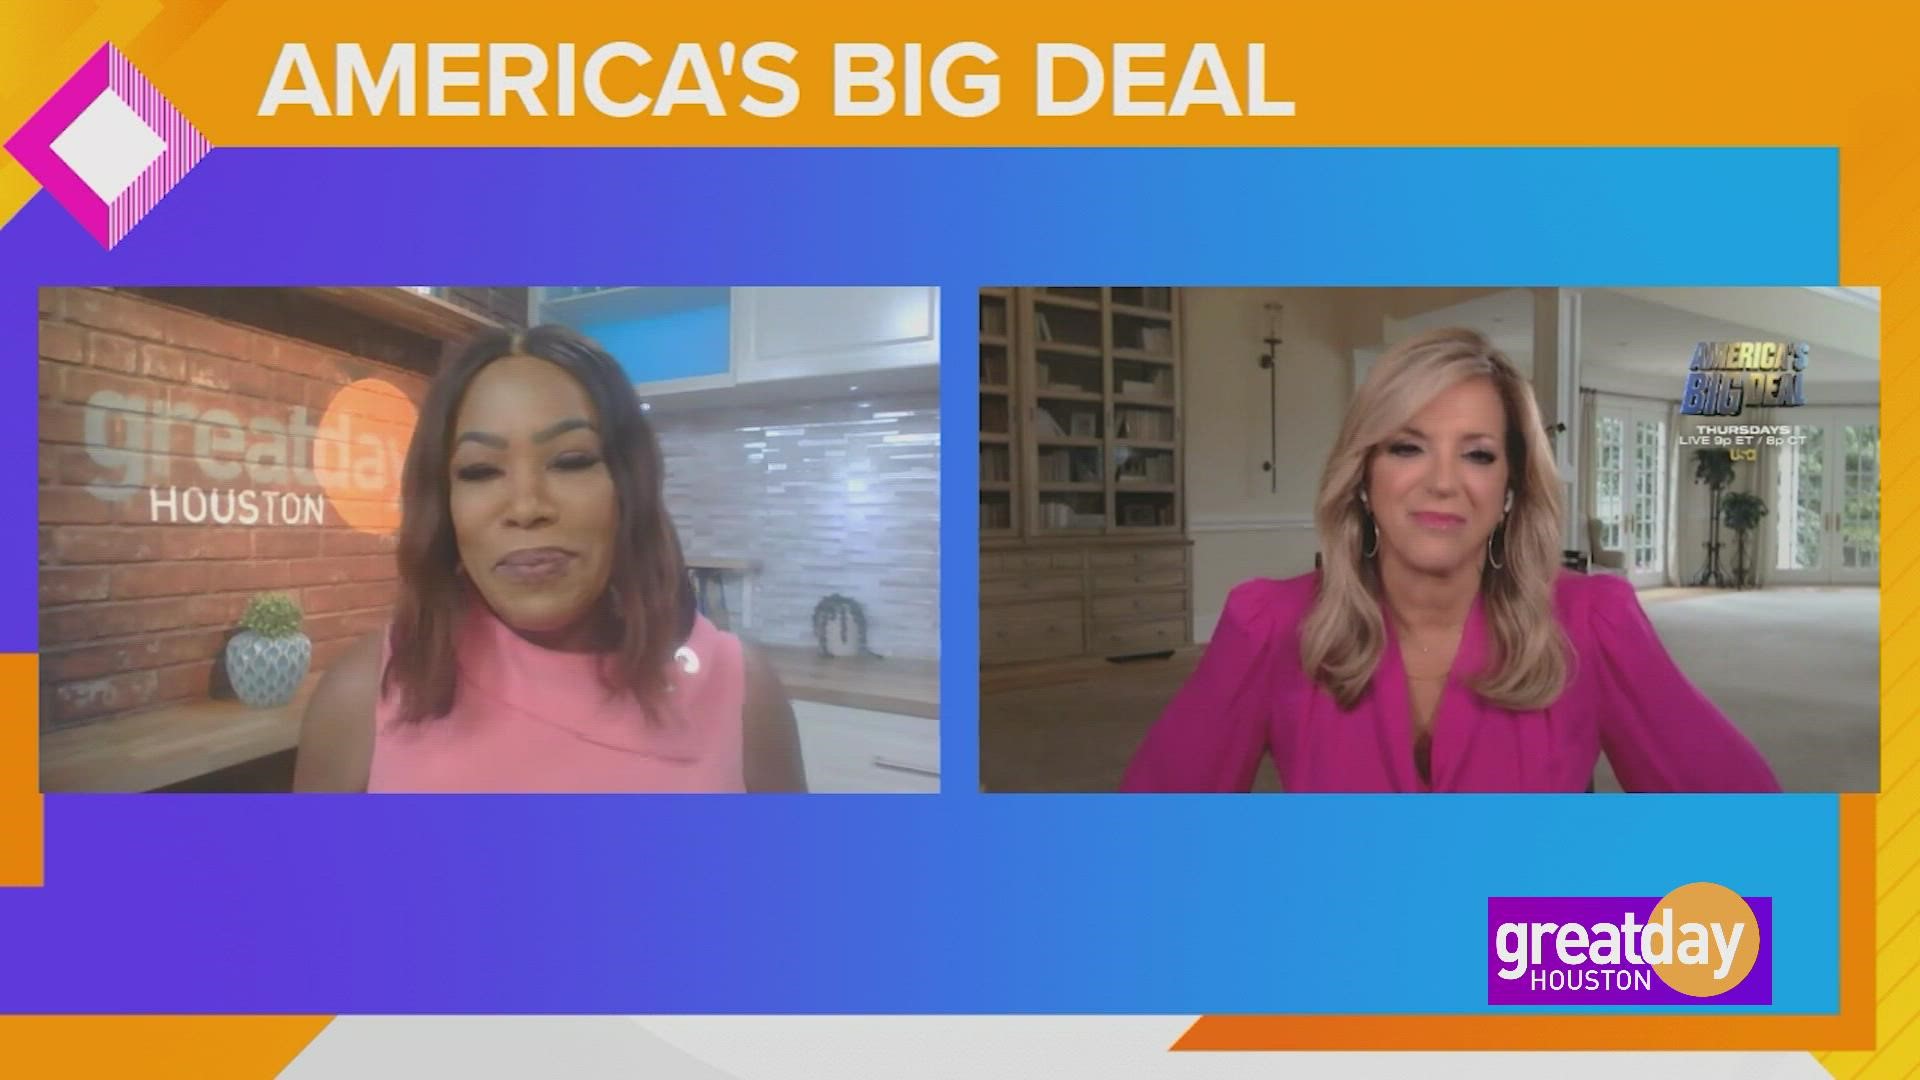 Deborah talks with Joy about her new competition series "America's Big Deal" for aspiring entrepreneurs.